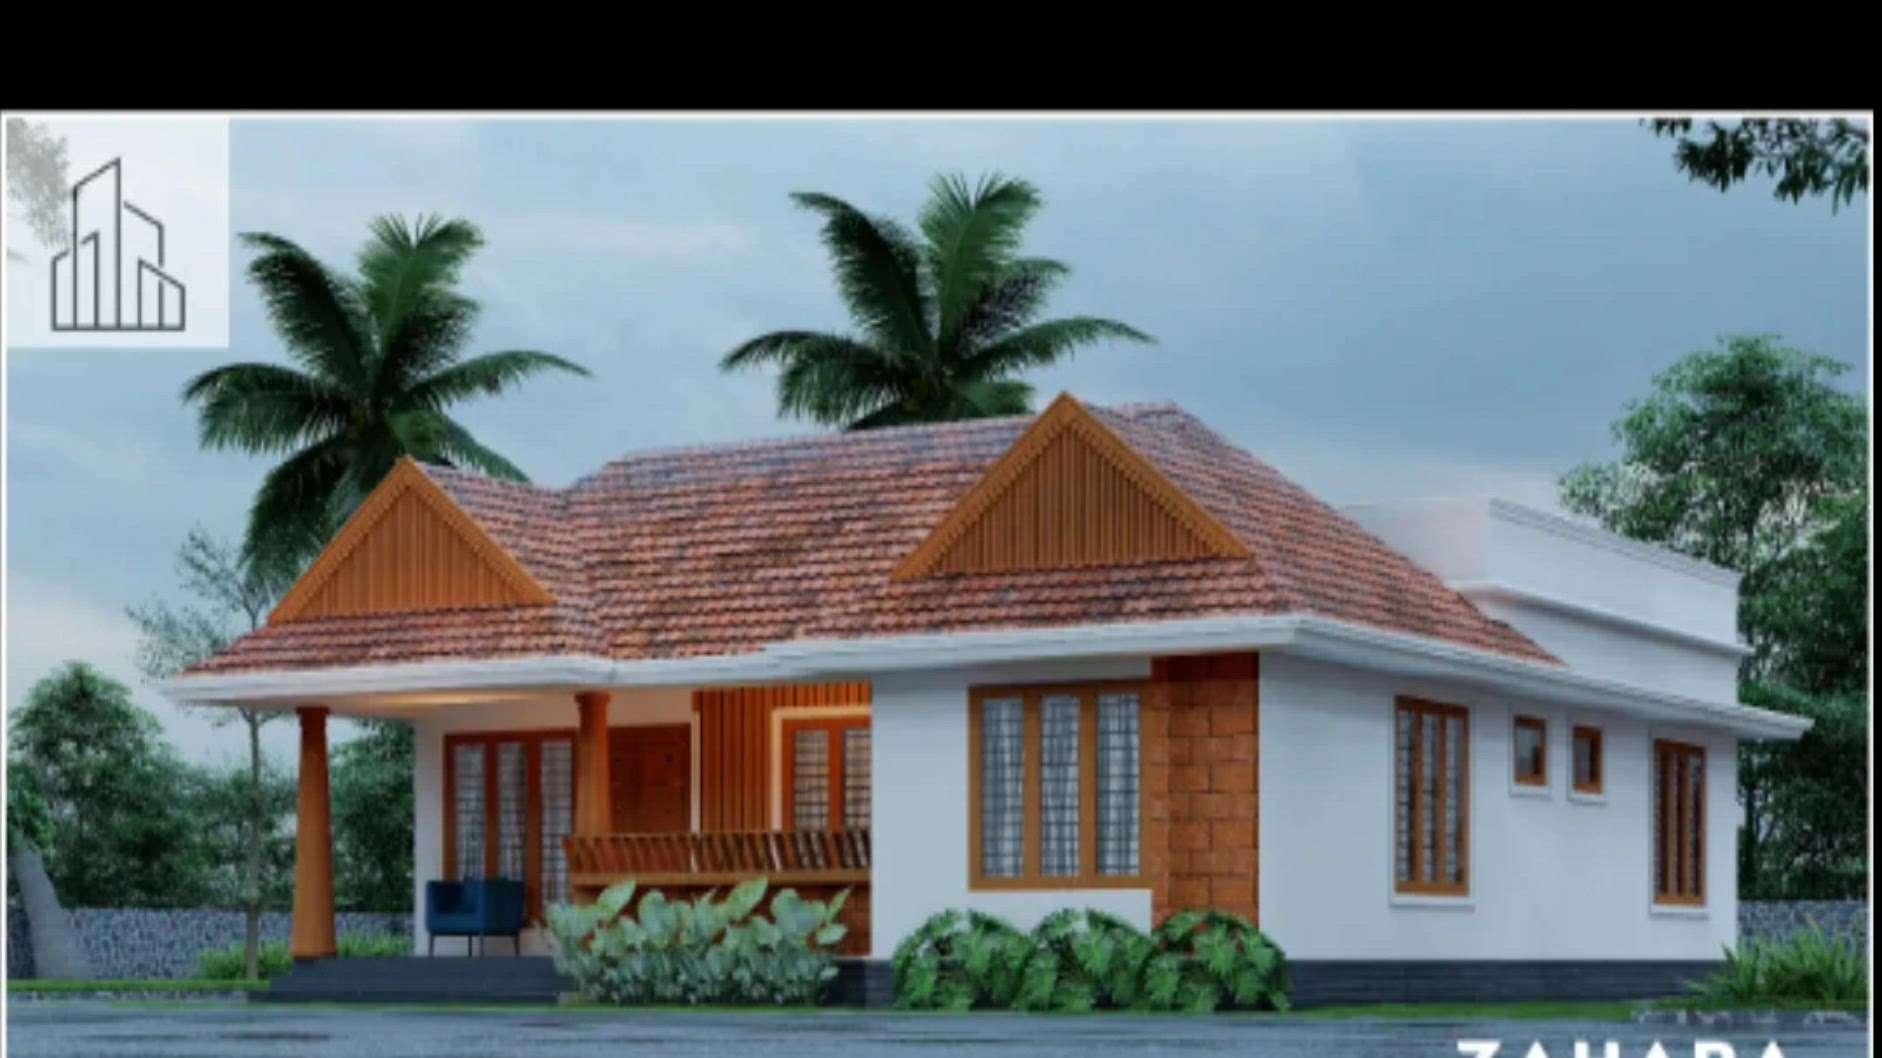 Job No : 193🏡
Client Name : Mr. Joji
Area : 1386 sqft
Location : Cherthala, Alappuzha
Stage : Main slab Formation

For more details Contact :
+91 9746047775

#homedecor #3ddesigning #buildingconstruction
#lovelyhome #dreamhome #malayali #newhomestyles #house
#modernhousedesigns #designersworld #civilengineering
#architecturalworks #artworks #homerenovations #builders
#keralahomestyles #traditionalhomes #kannurhomes#lowcosthomesinkerala #naturalfriendlyhomeinkerala 
#interiordesigners #interiorworks #moderninterior #fancyinteriors
#homedecor#homesweethome#buildersinkochi#elevationdesign#zaharabuilders